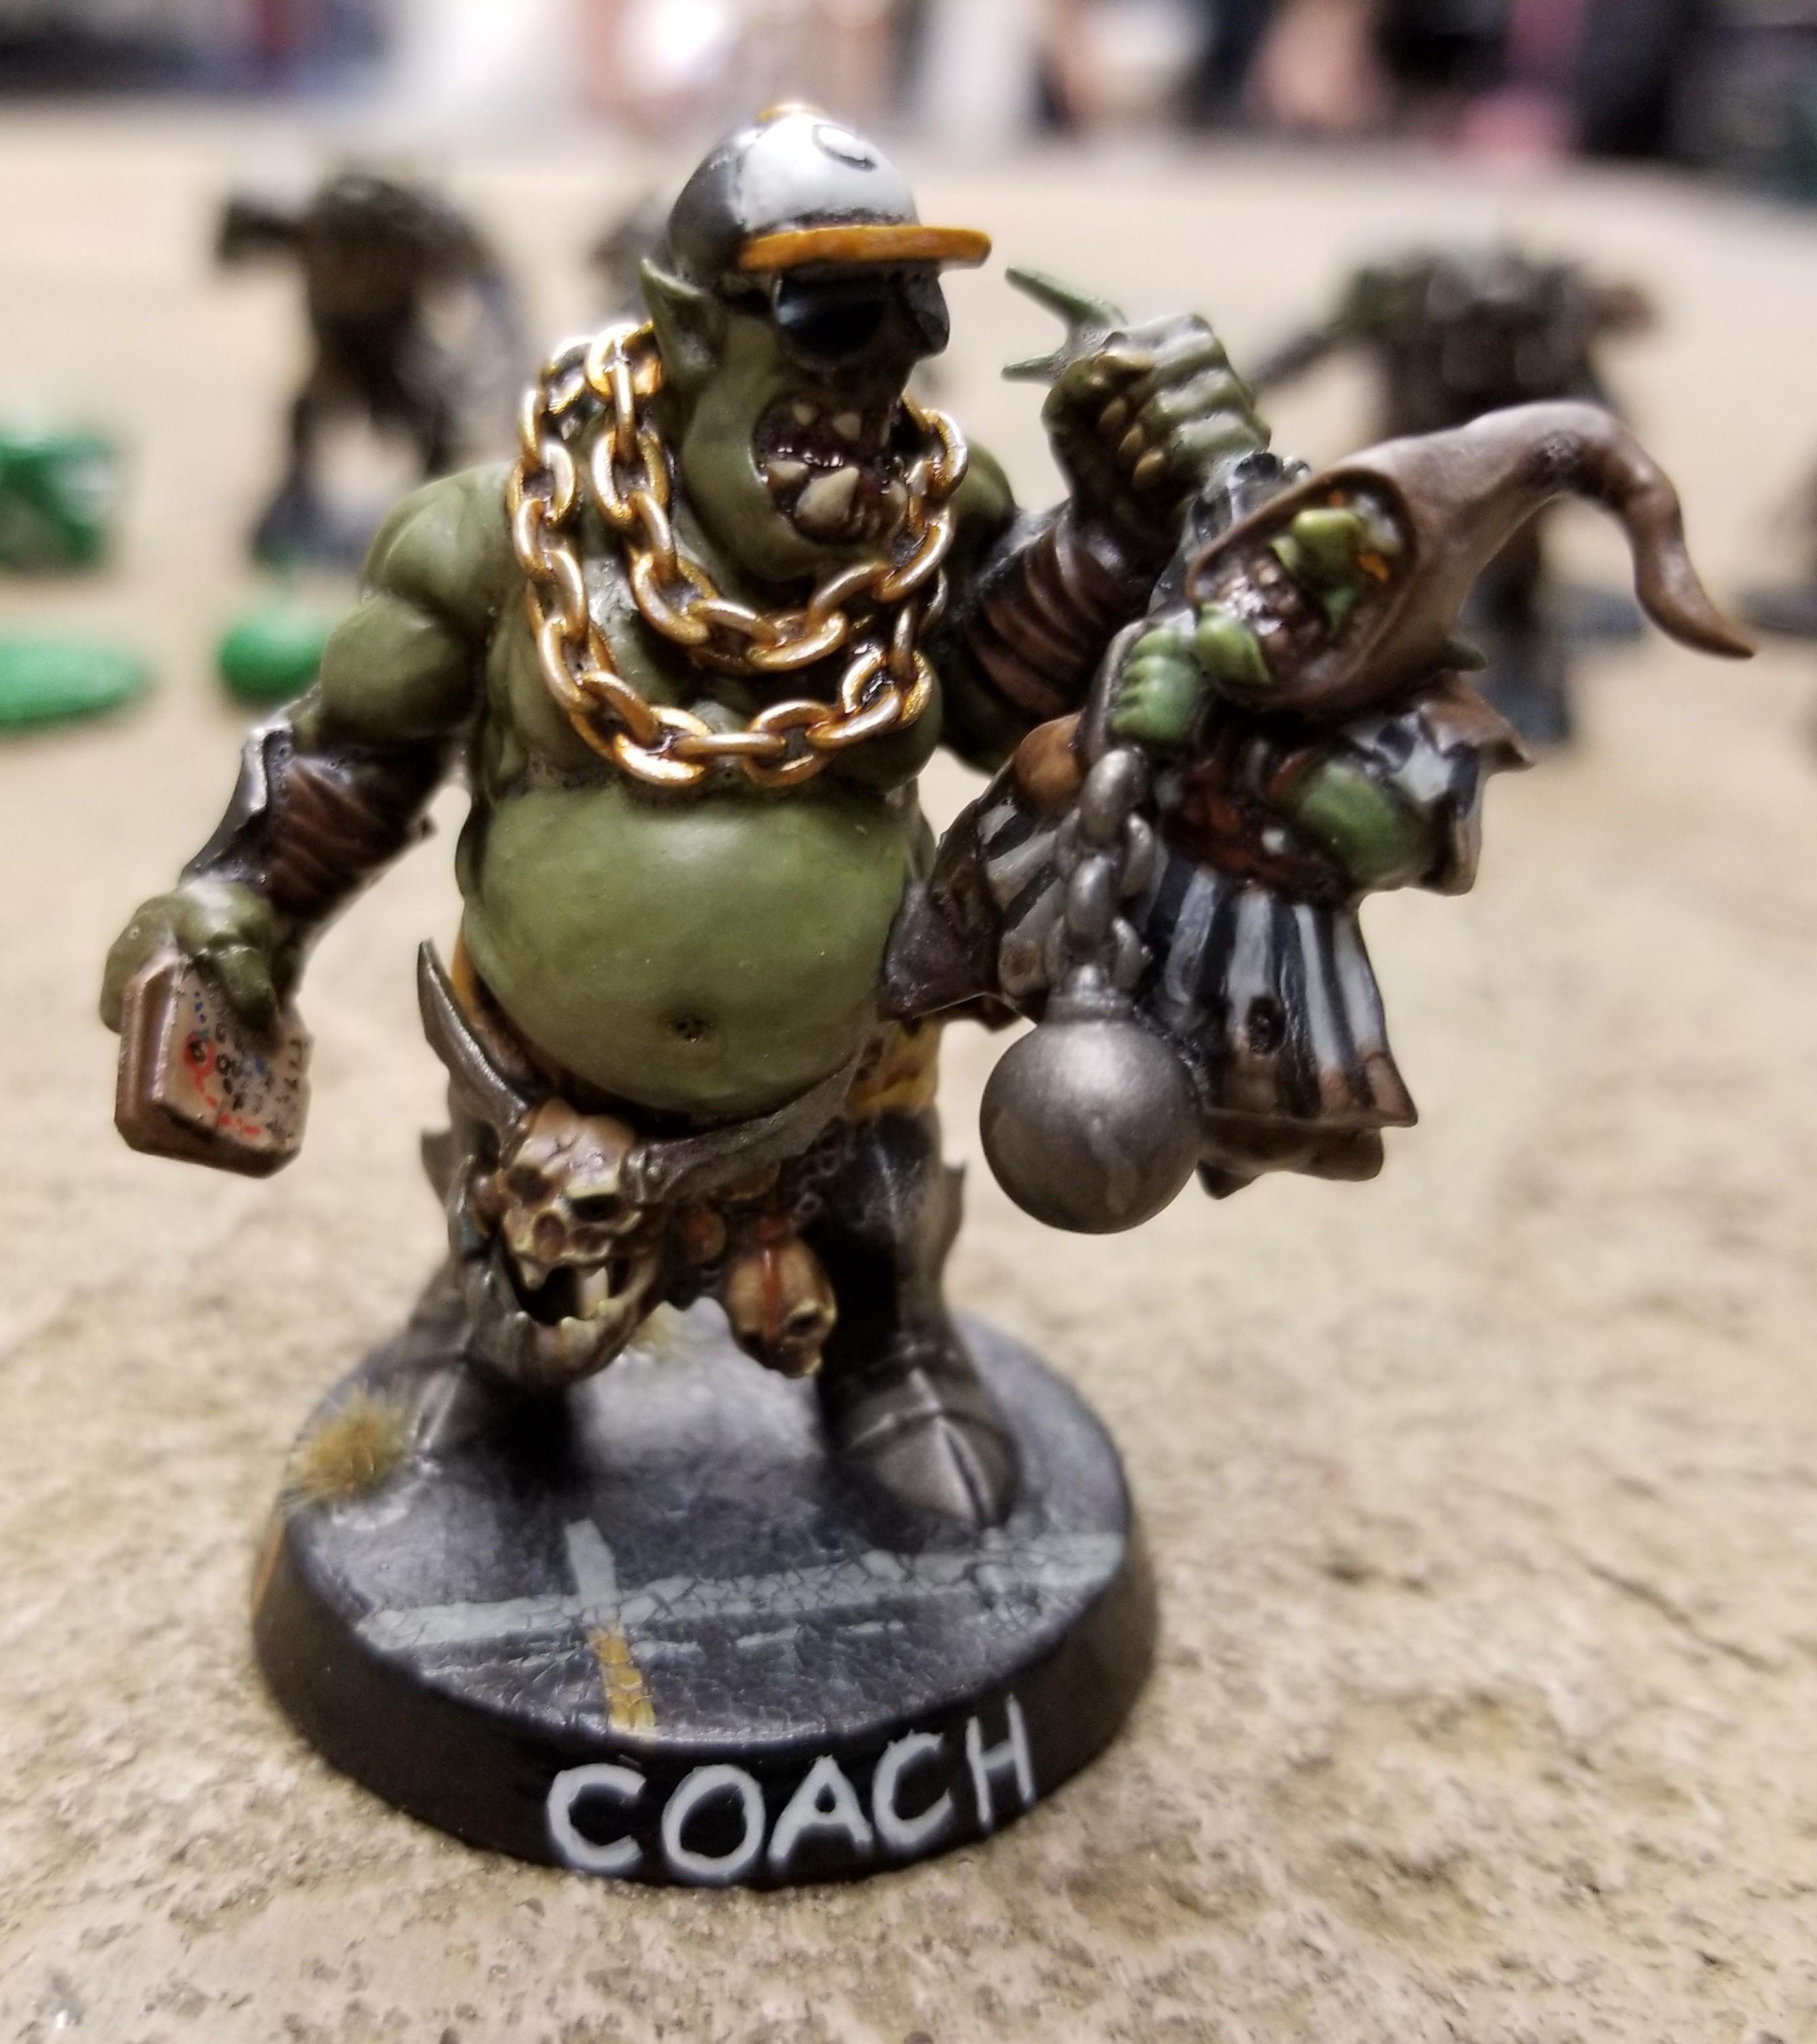 Blood Bowl, Coach, Conversion, Go Steelers, Goblins, Gouged Eyes, Kitbash, Orcs, Orks, Pittsburgh, Referee